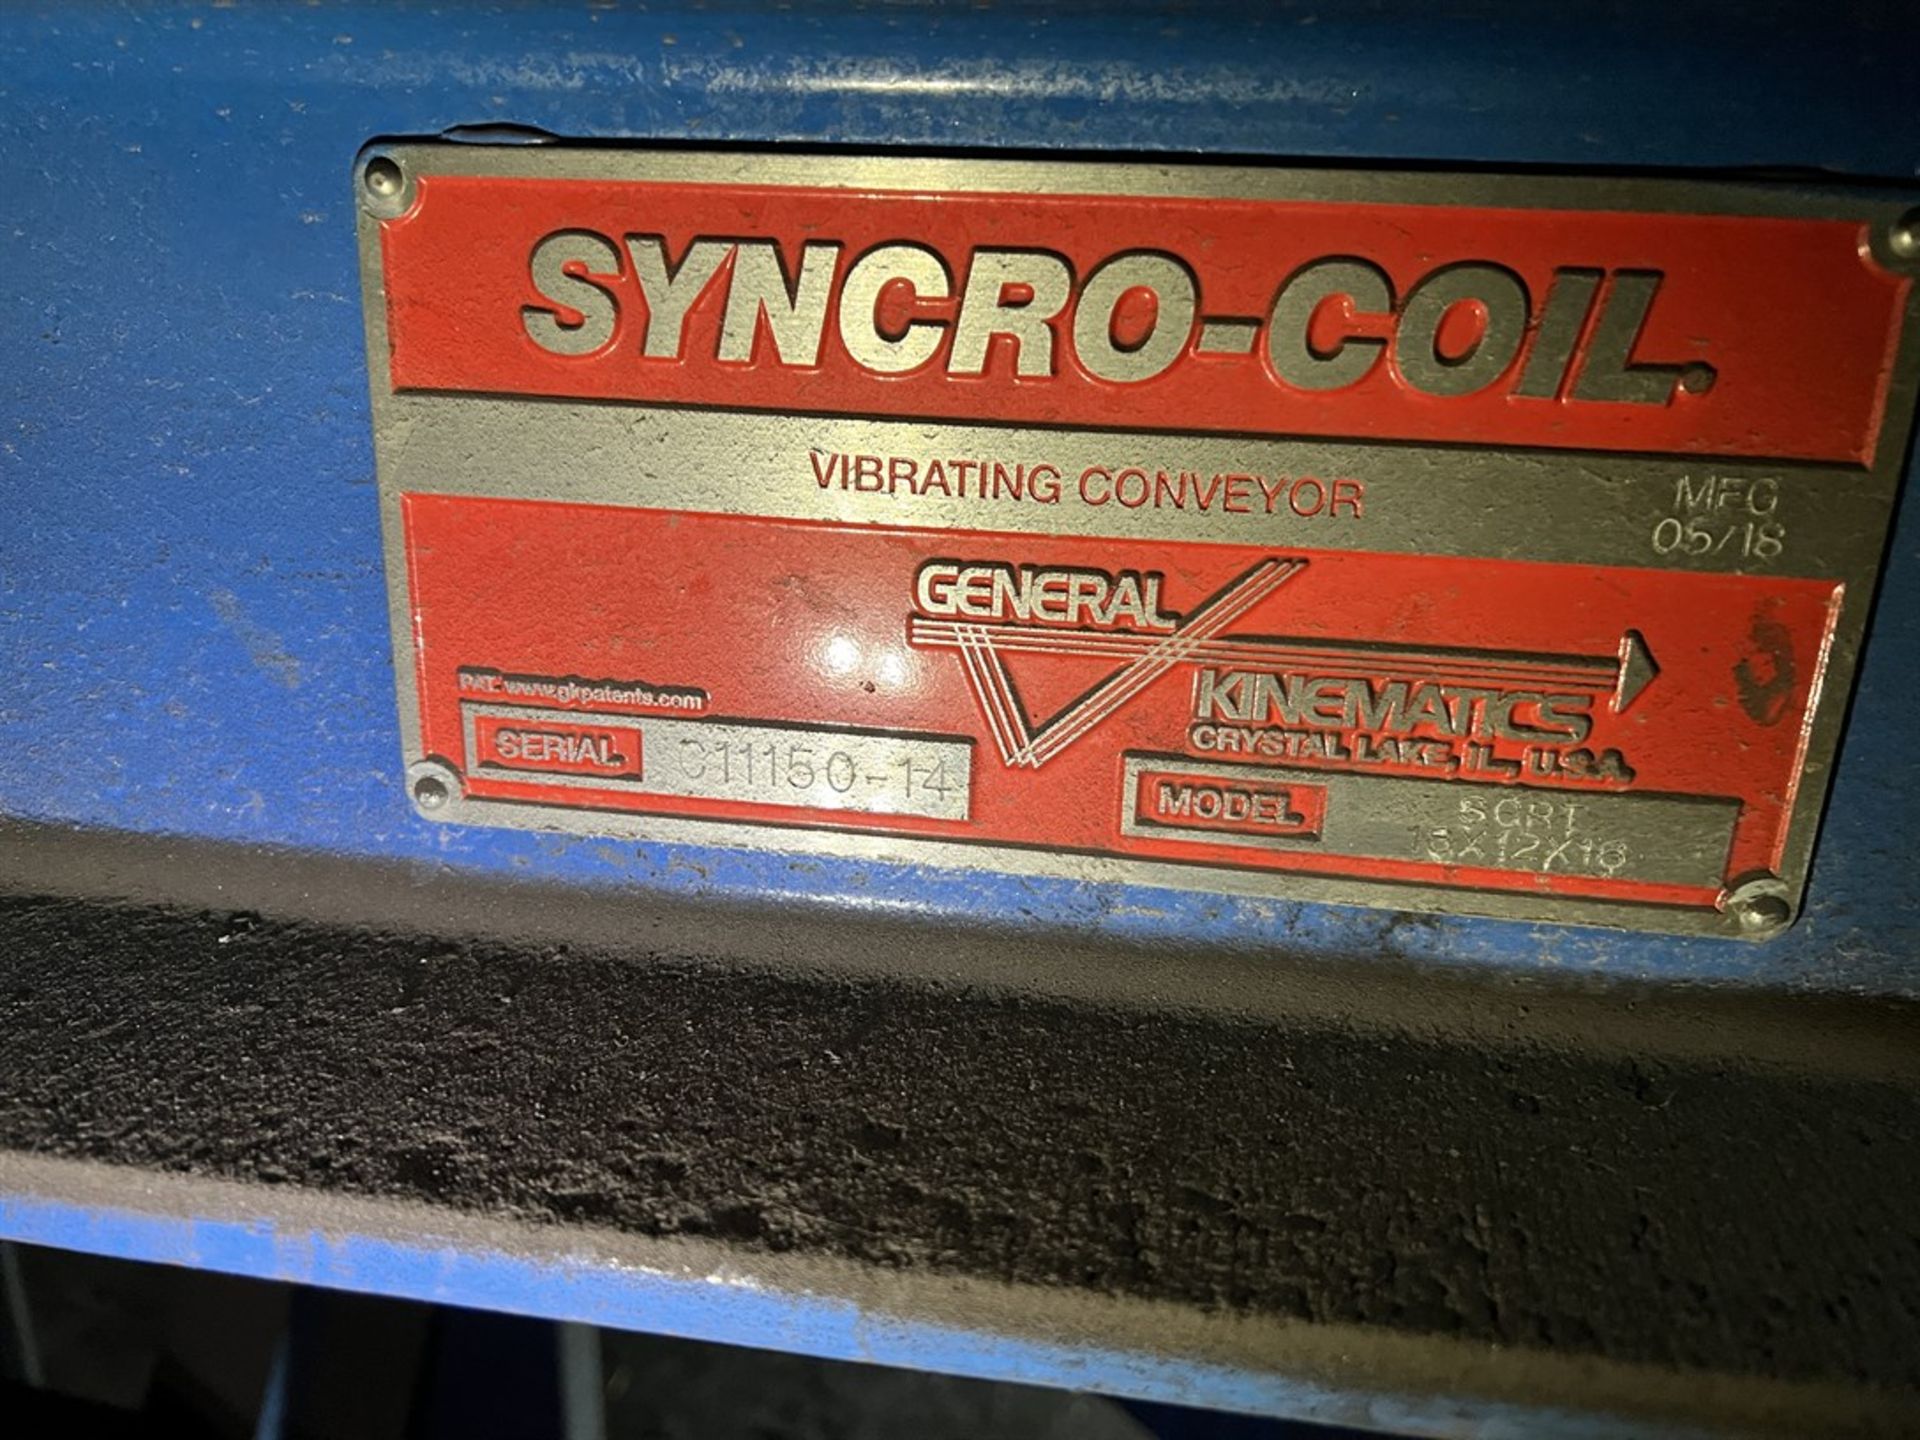 2018 GENERAL KINEMATICS Syncro-Coil SCRT18X12X16 Vibrating Conveyor, s/n C11150-14 - Image 4 of 6